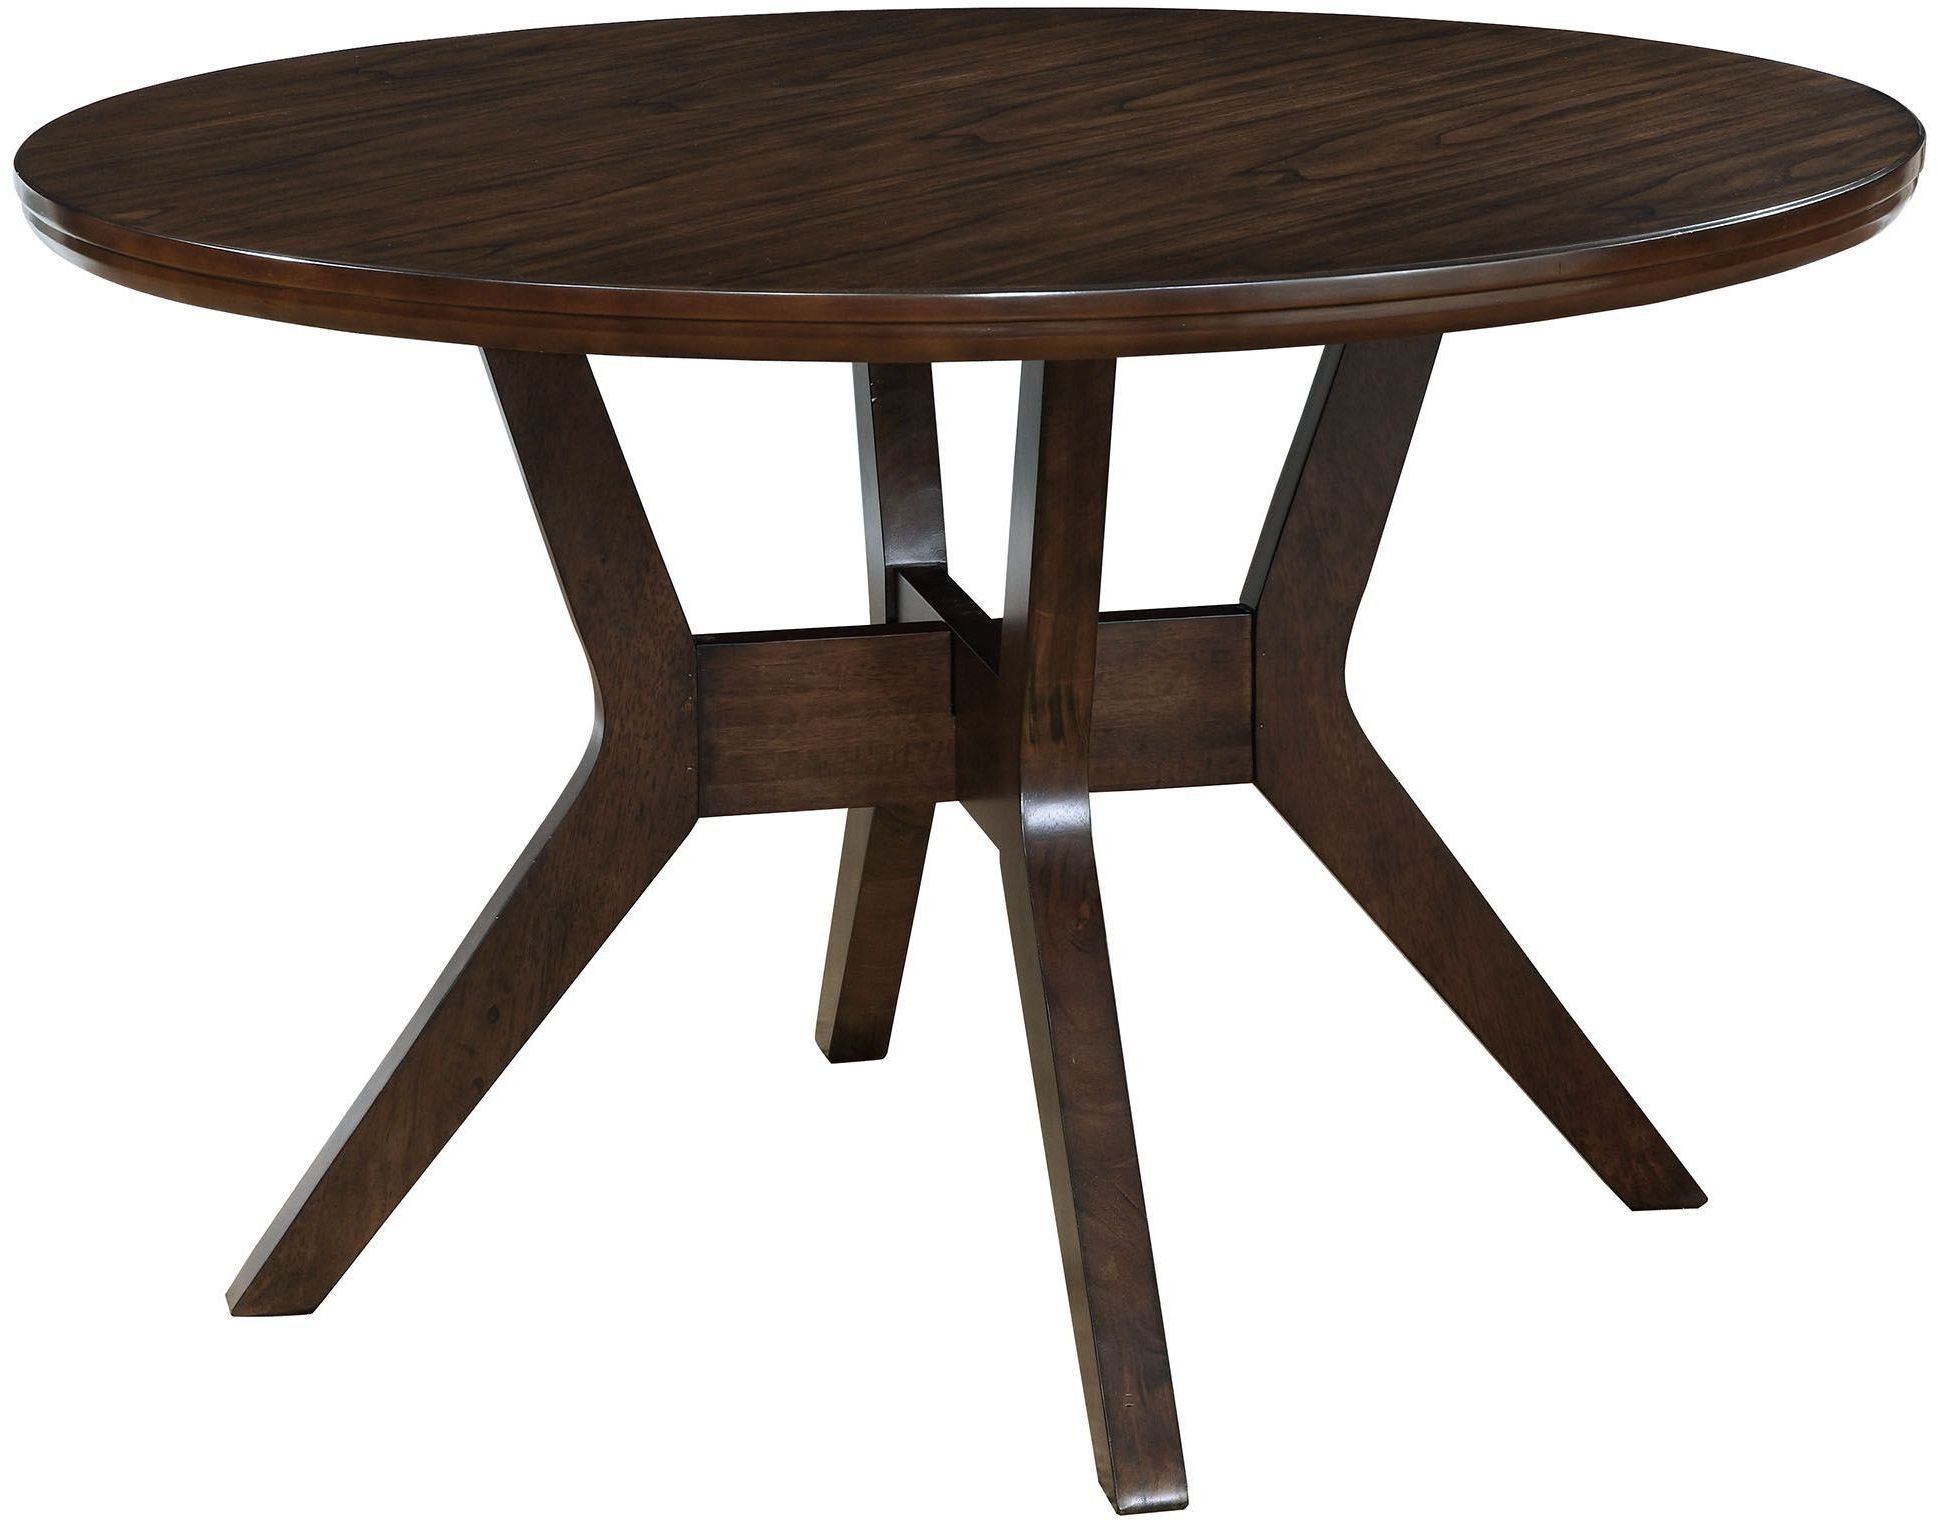 Abelone Walnut Round Dining Table From Furniture Of Intended For Latest Walnut And White Dining Tables (View 12 of 20)